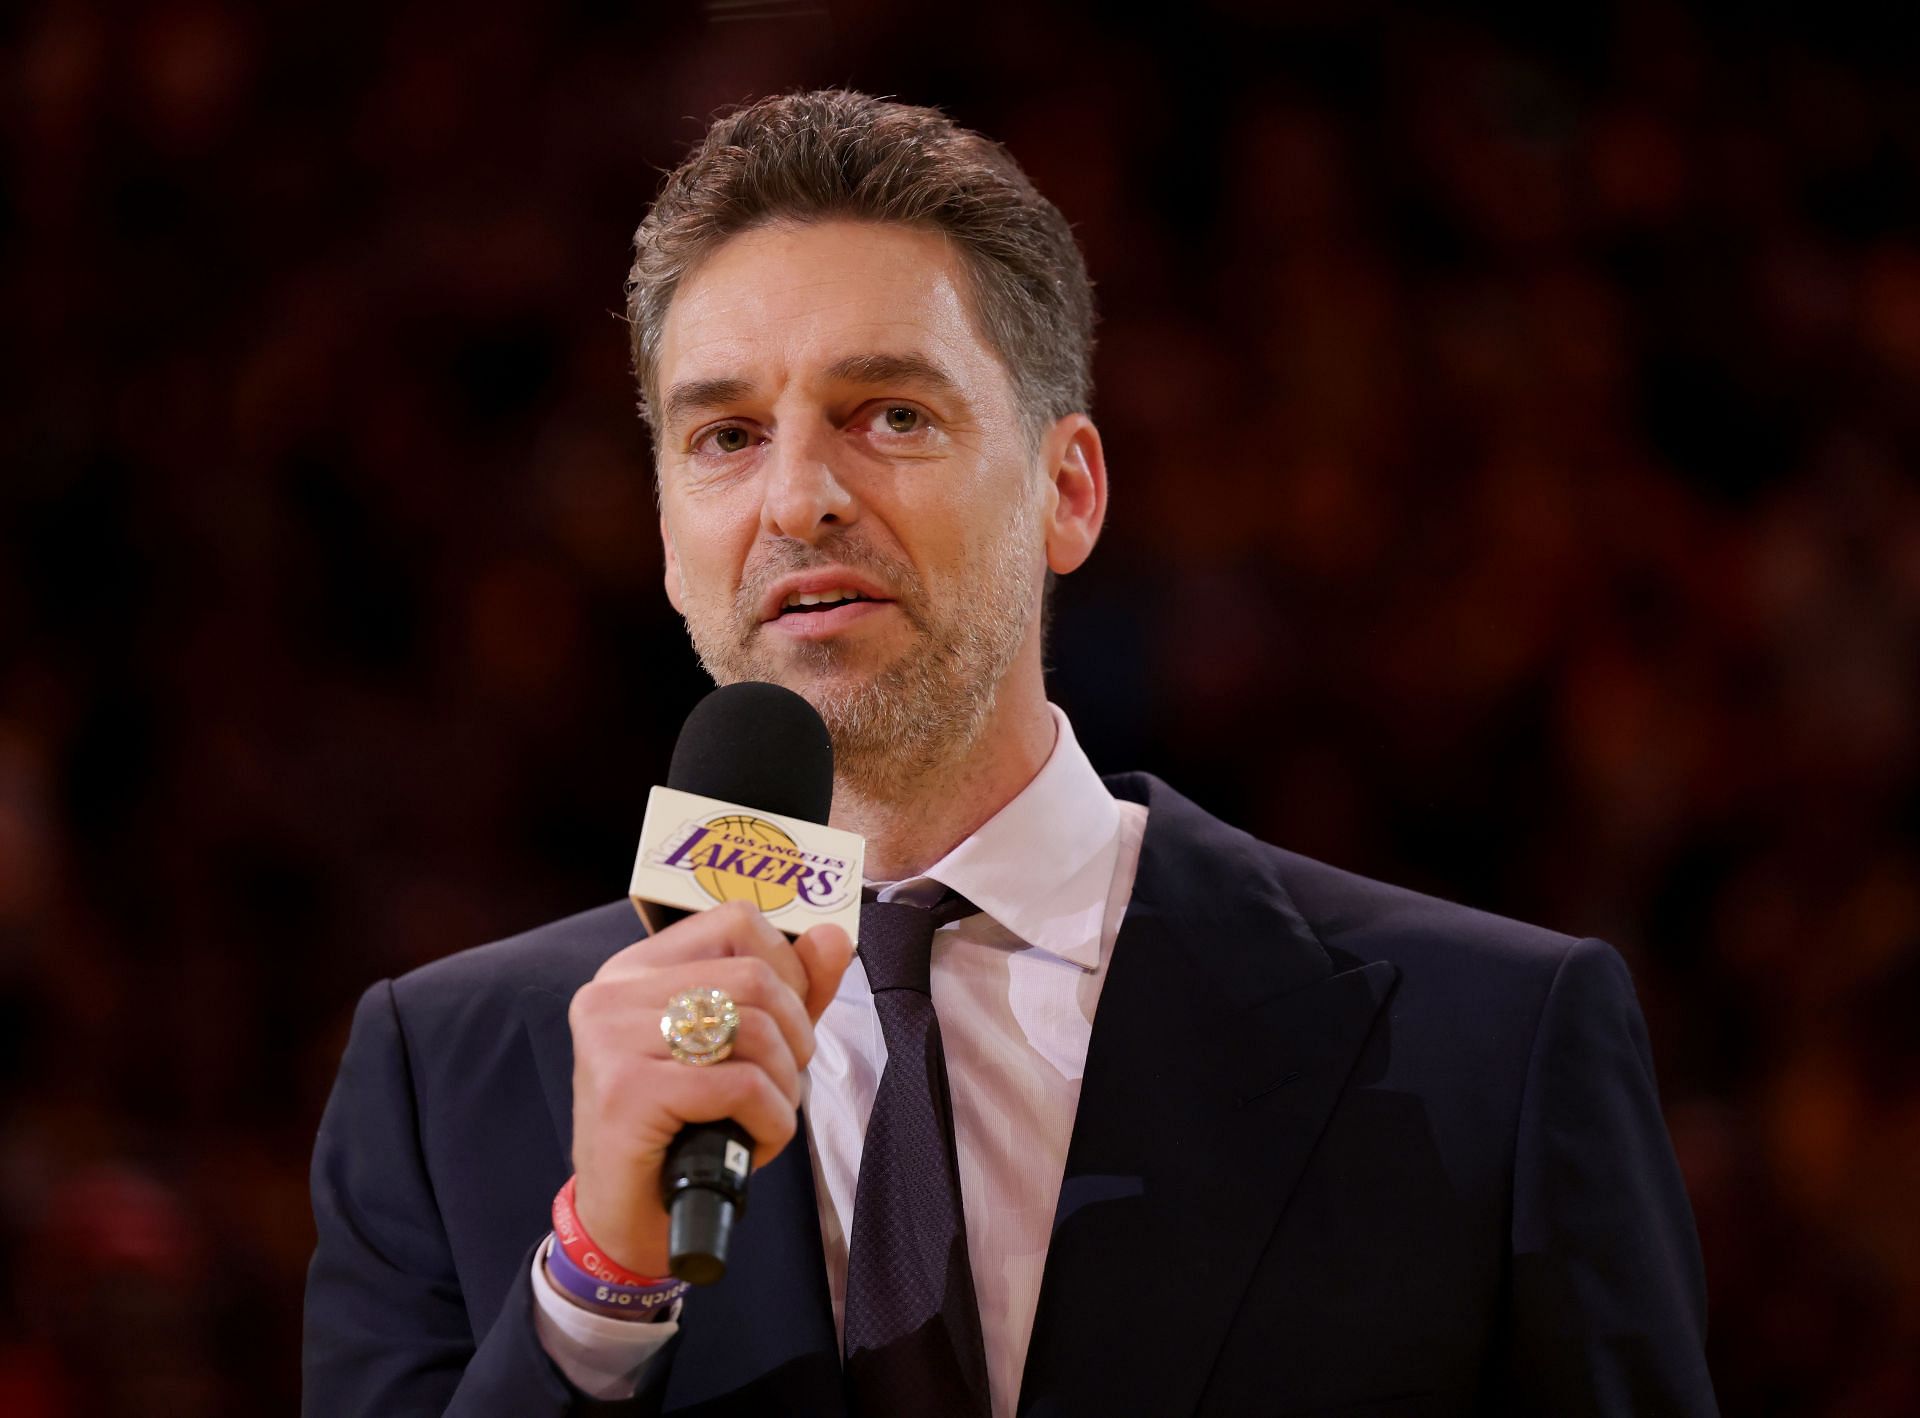 Pau Gasol says his jersey retirement ceremony could take place